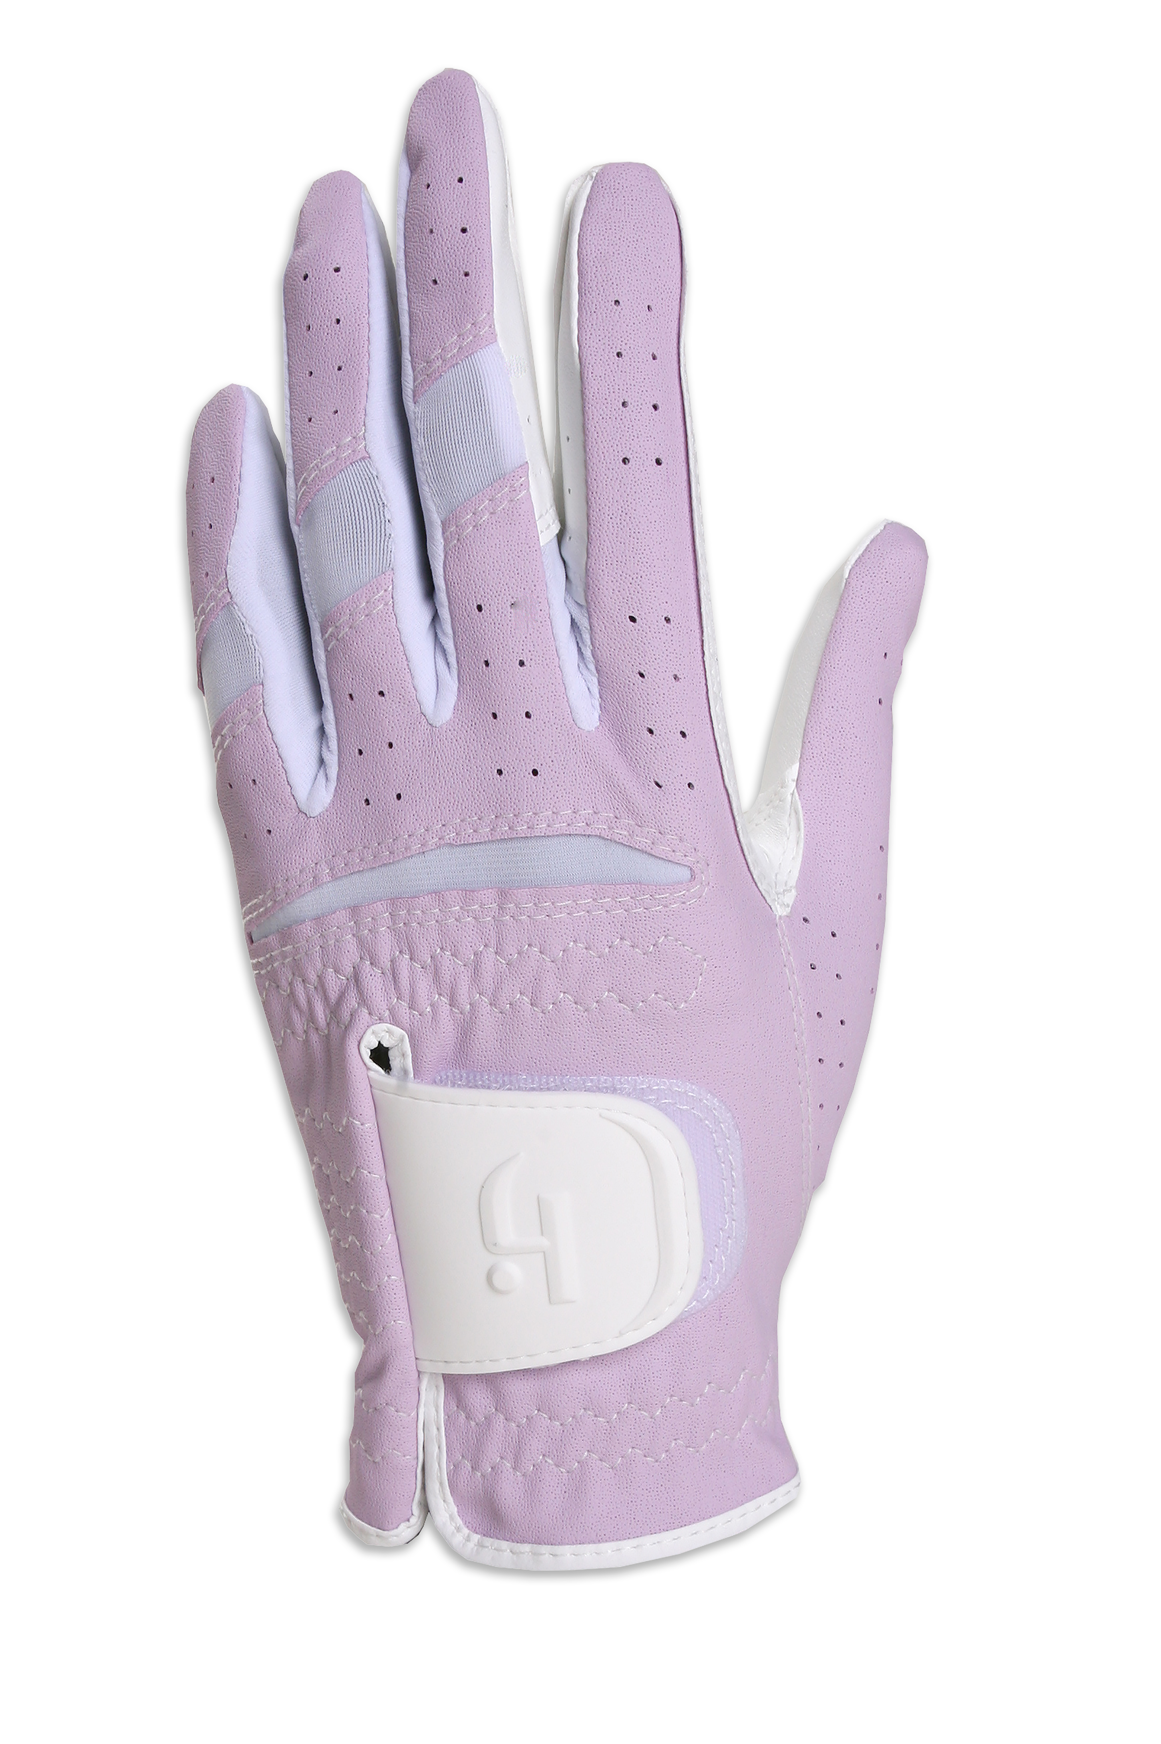 HJ Gripper Glove Lilac (For LeftHand)